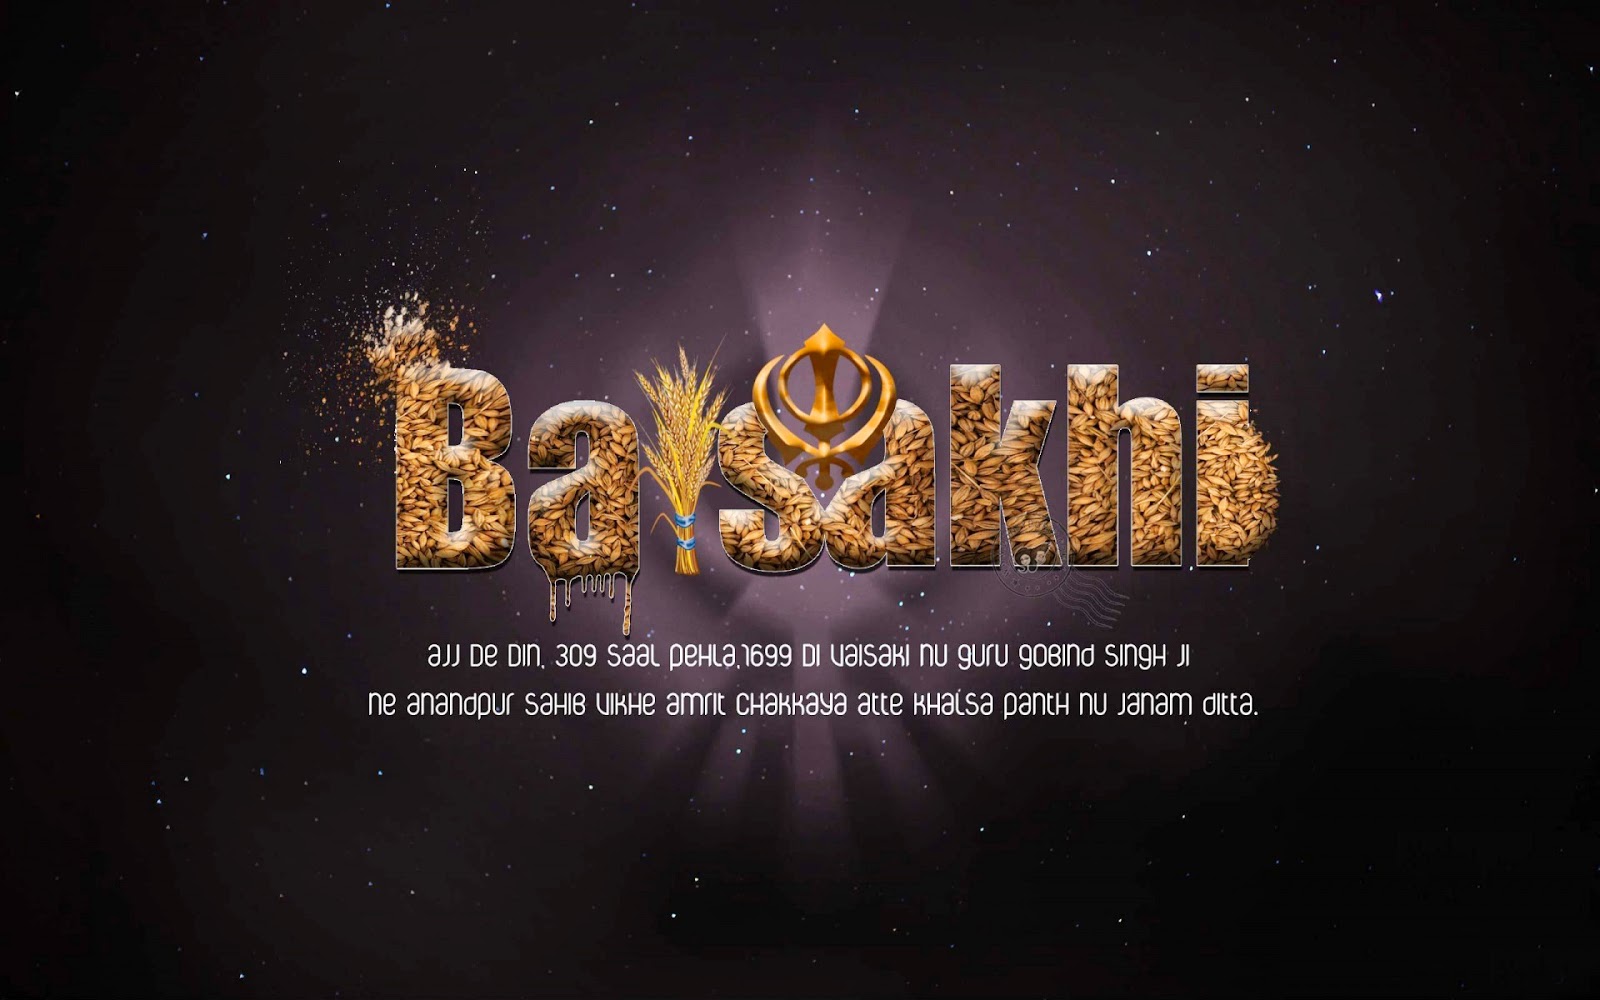 Missing Beats of Life: Happy Baisakhi 2014 HD Wallpapers and Images